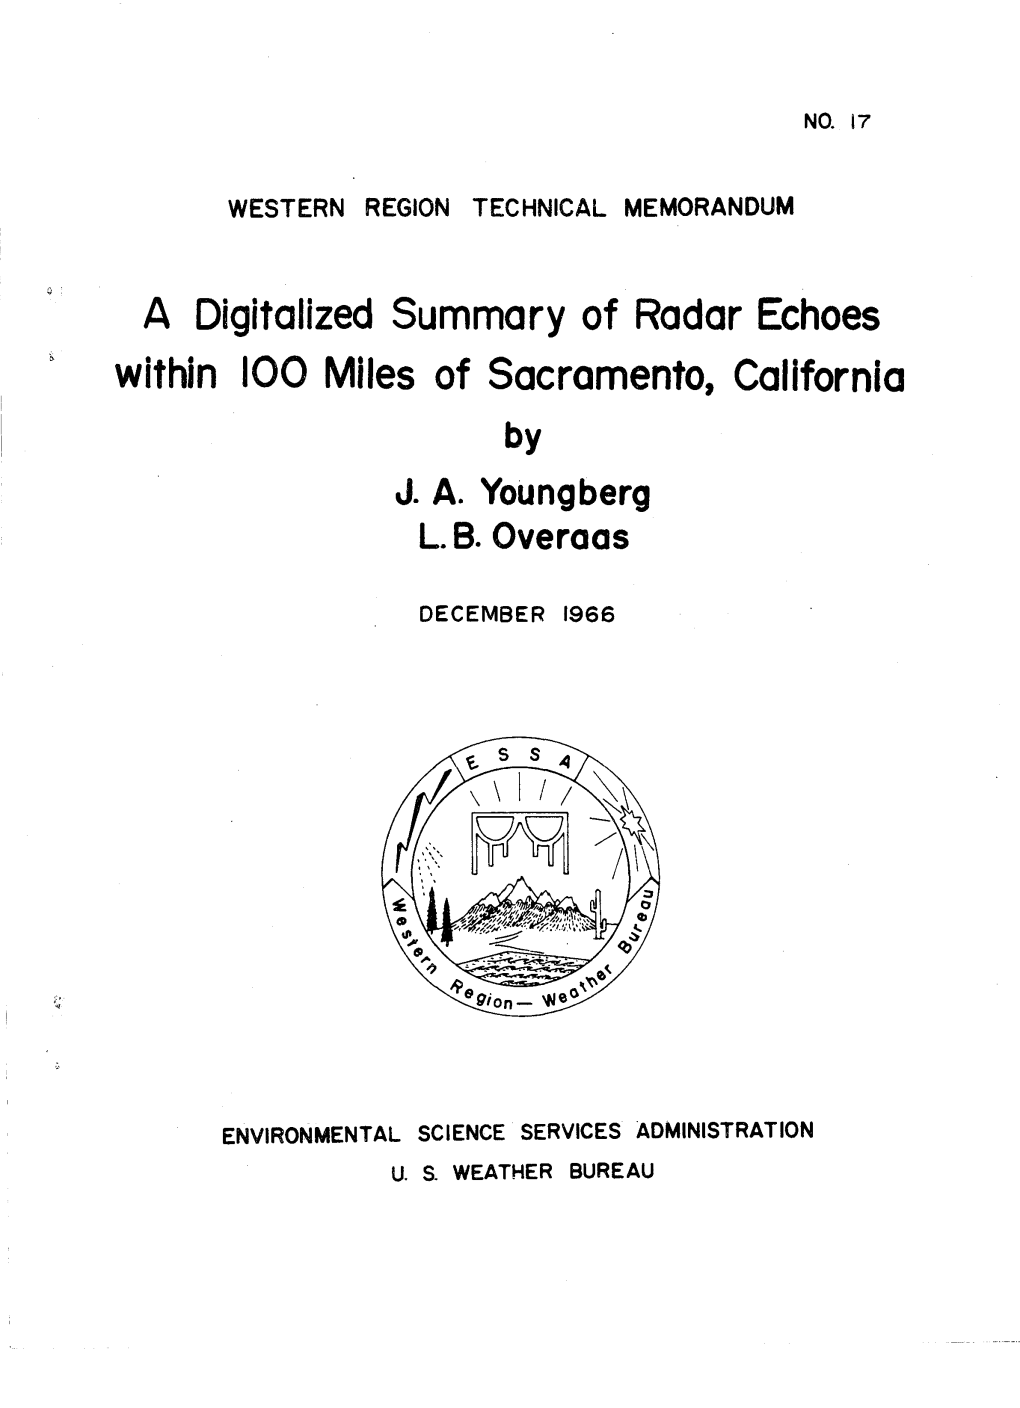 A Digitalized Summary of Radar Echoes Within 100 Miles of Sacramento, California by J